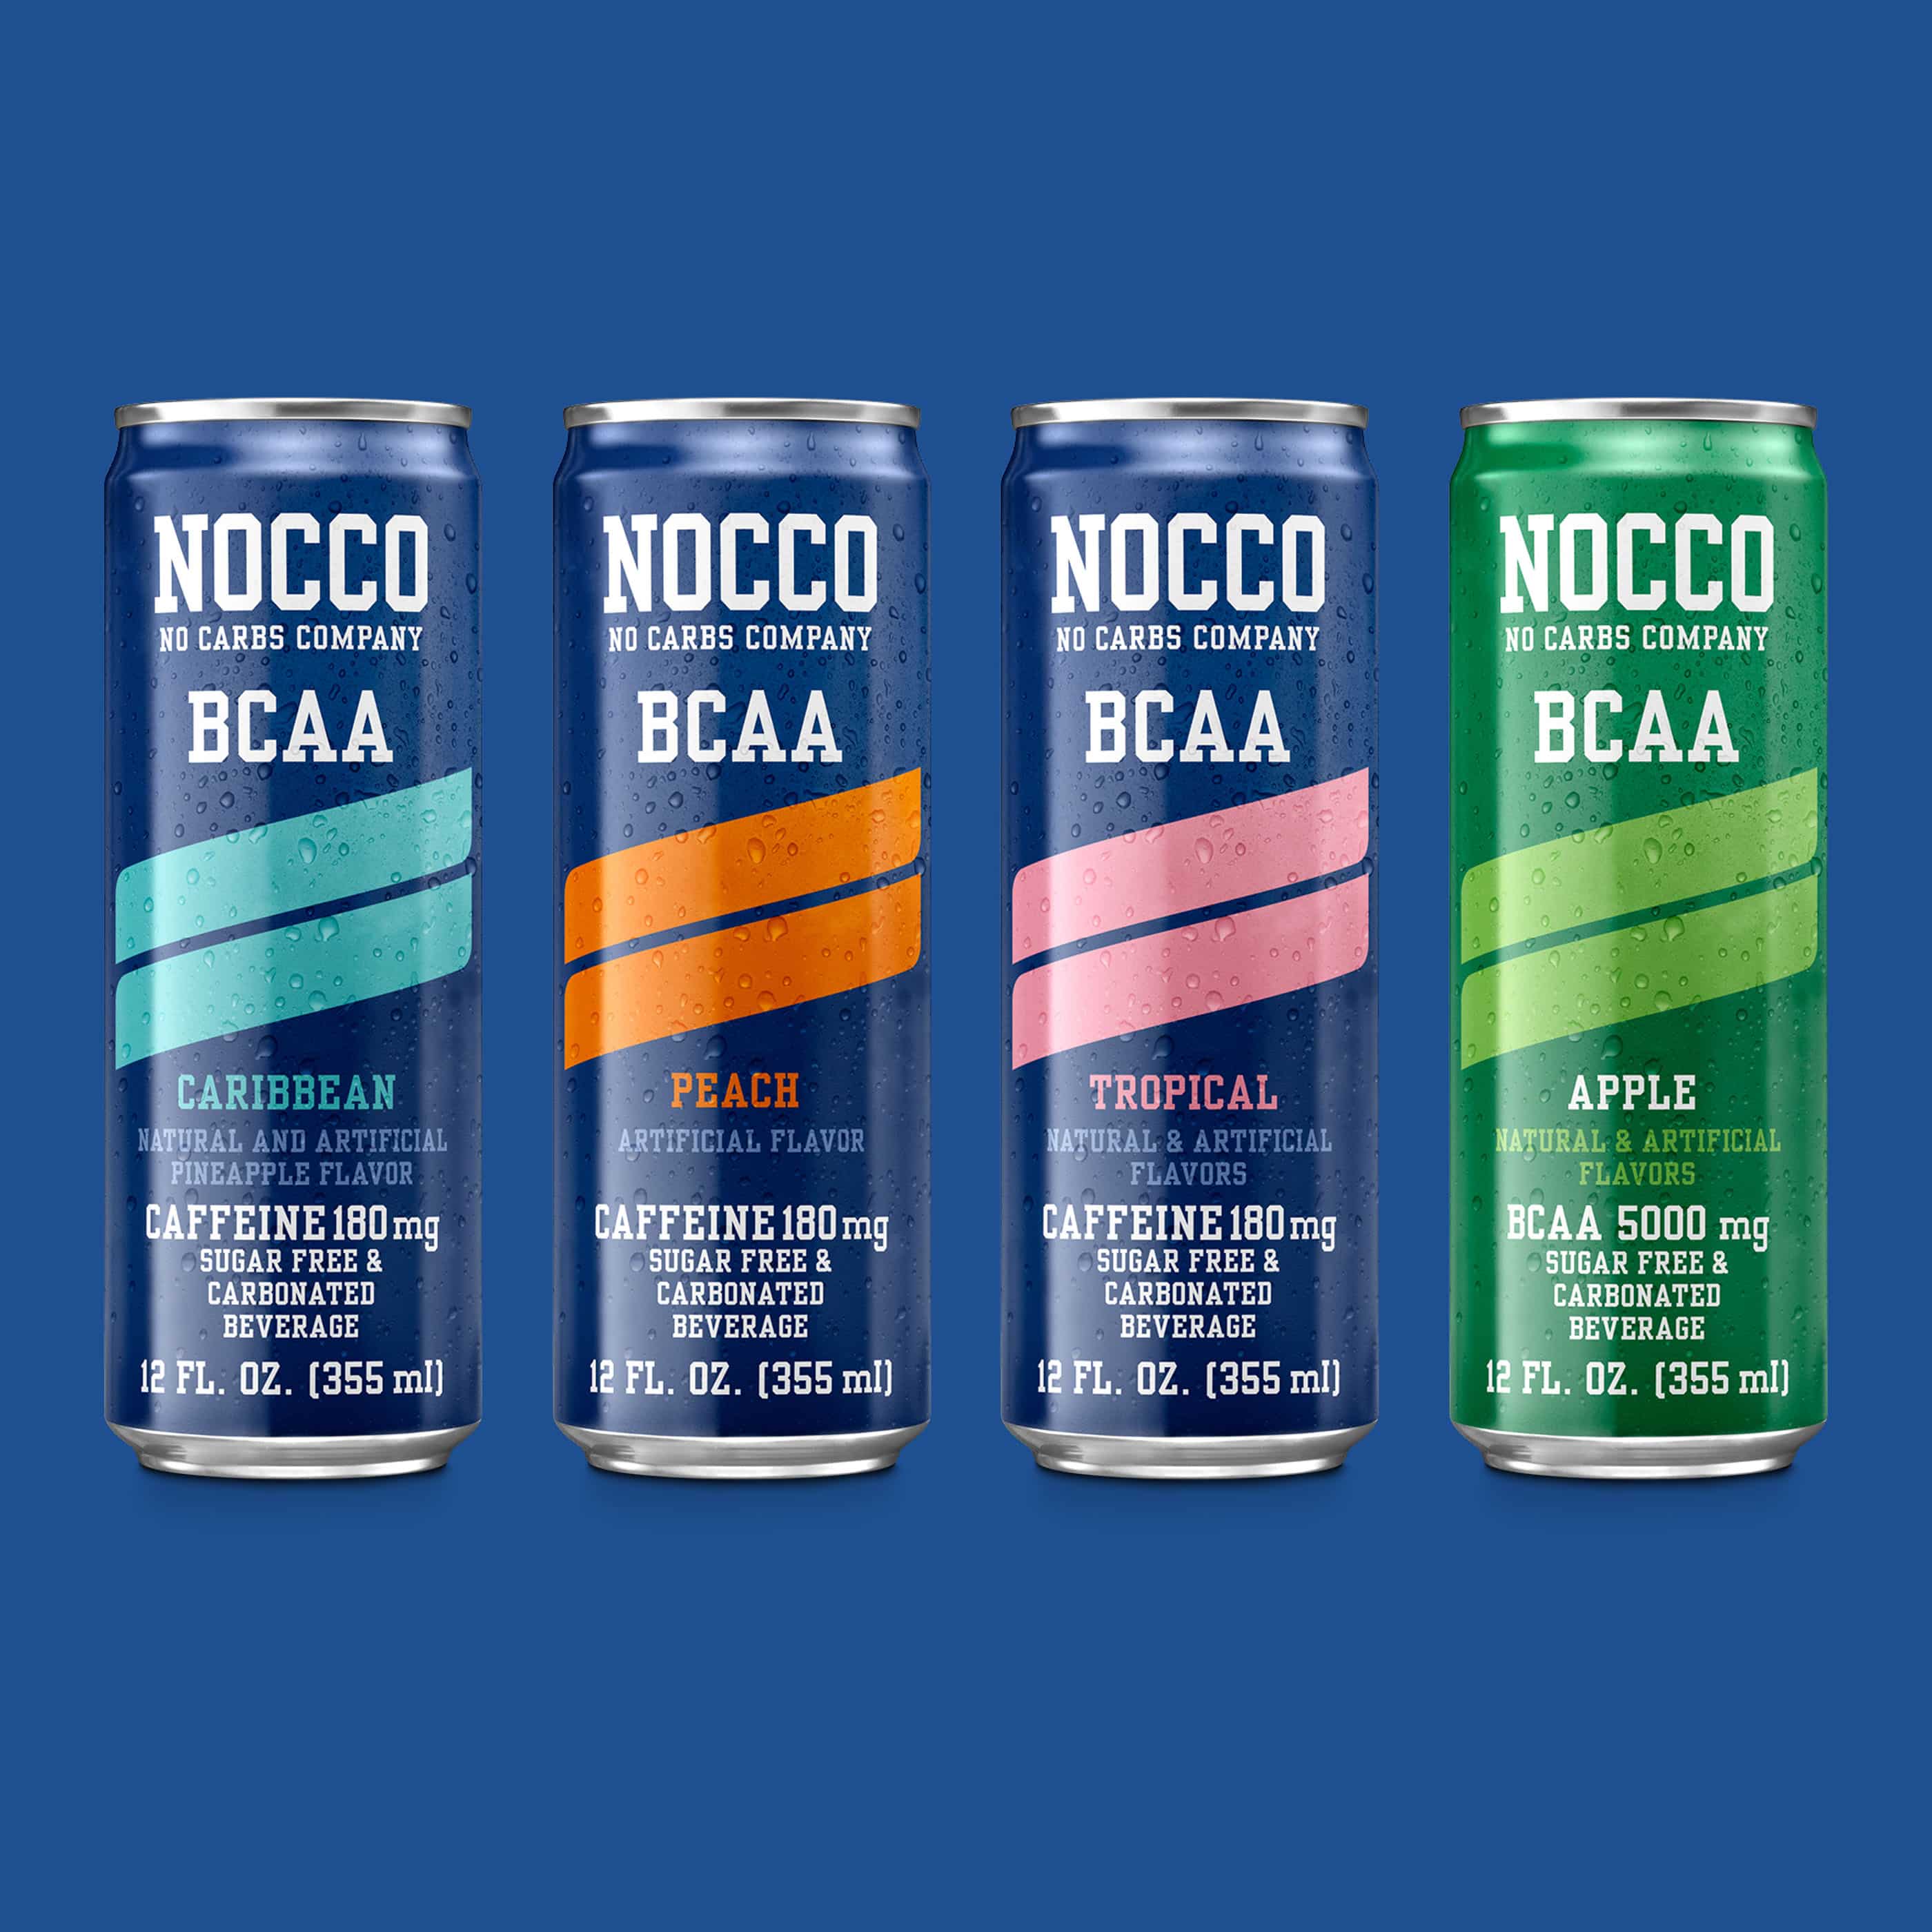 NOCCO now available in the U.S — NOCCO